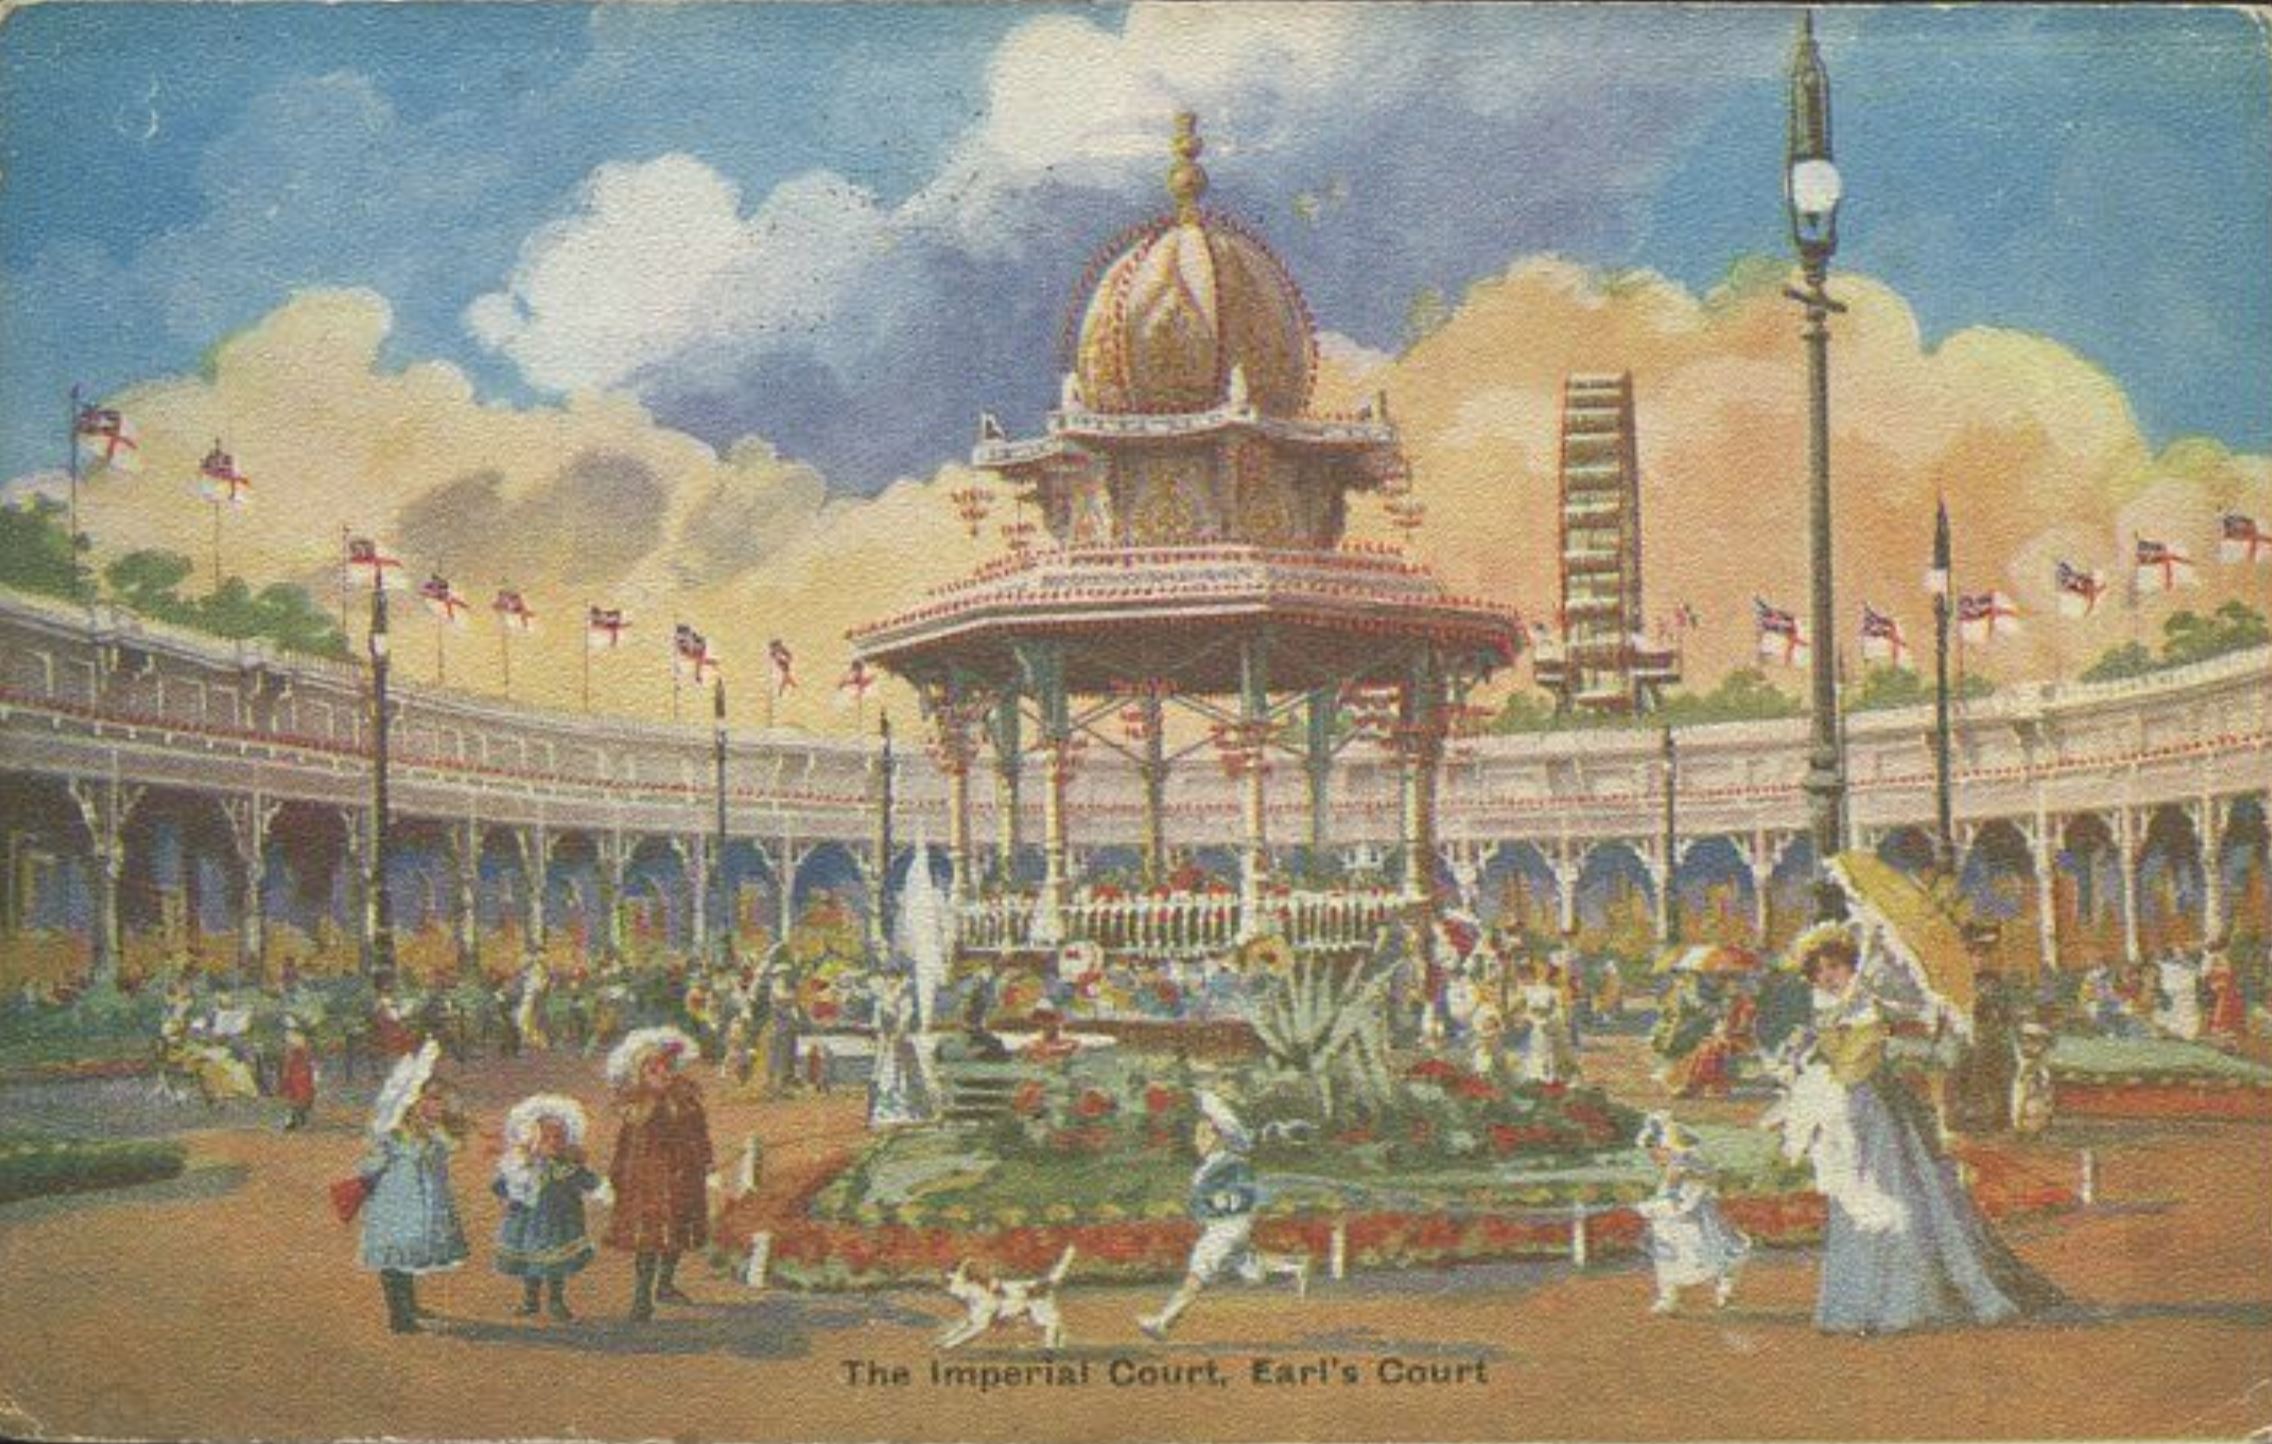 Postcard of the Exhibition at Earl's Court 1905.